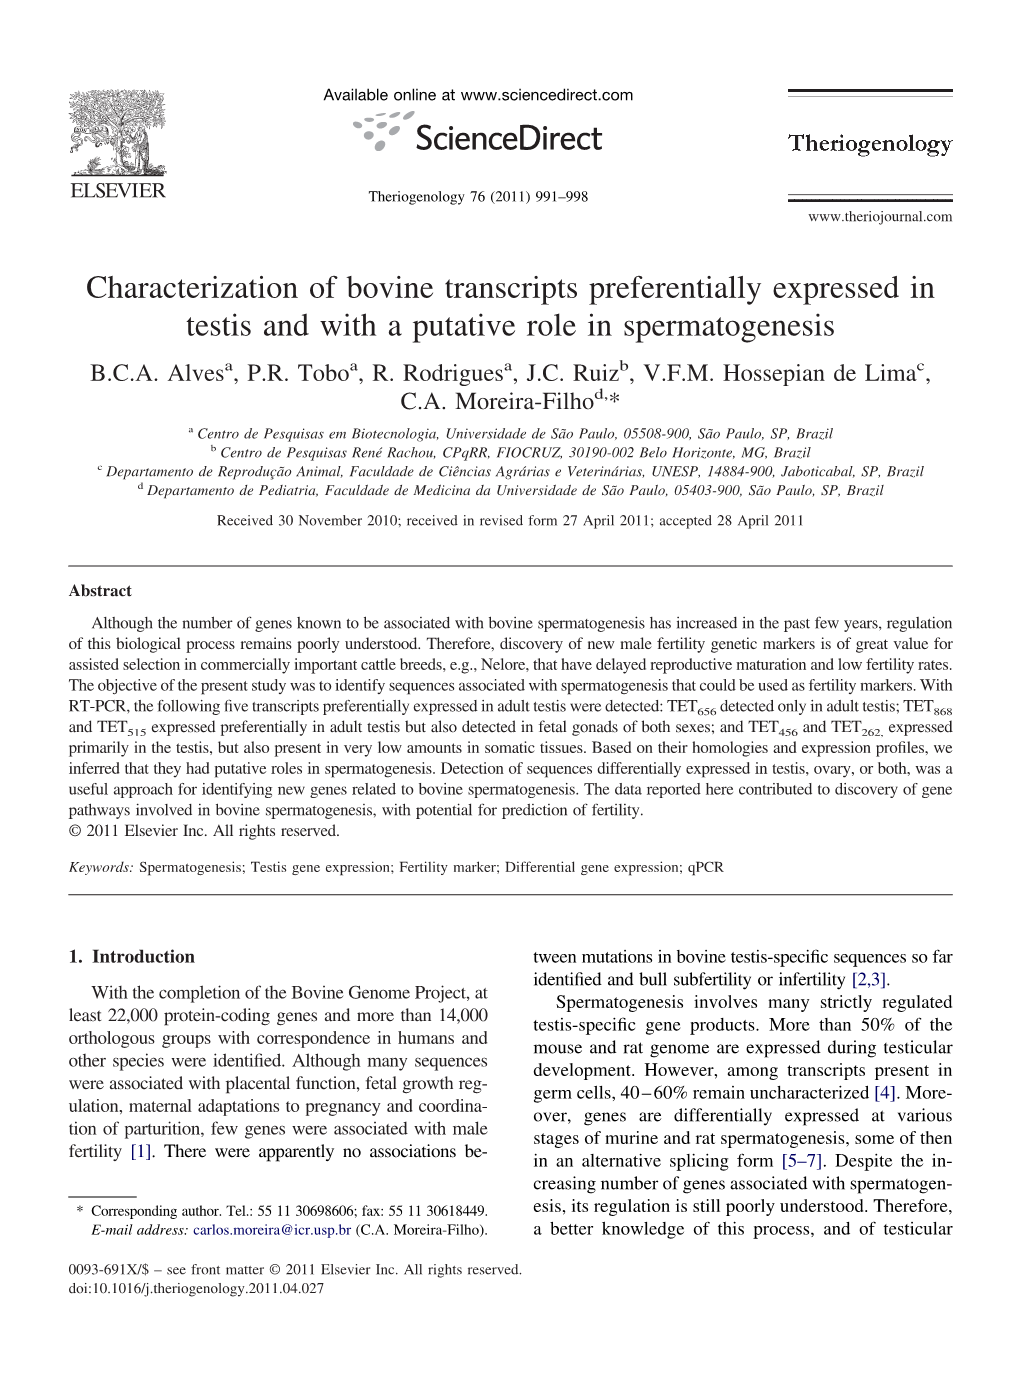 Characterization of Bovine Transcripts Preferentially Expressed in Testis and with a Putative Role in Spermatogenesis B.C.A